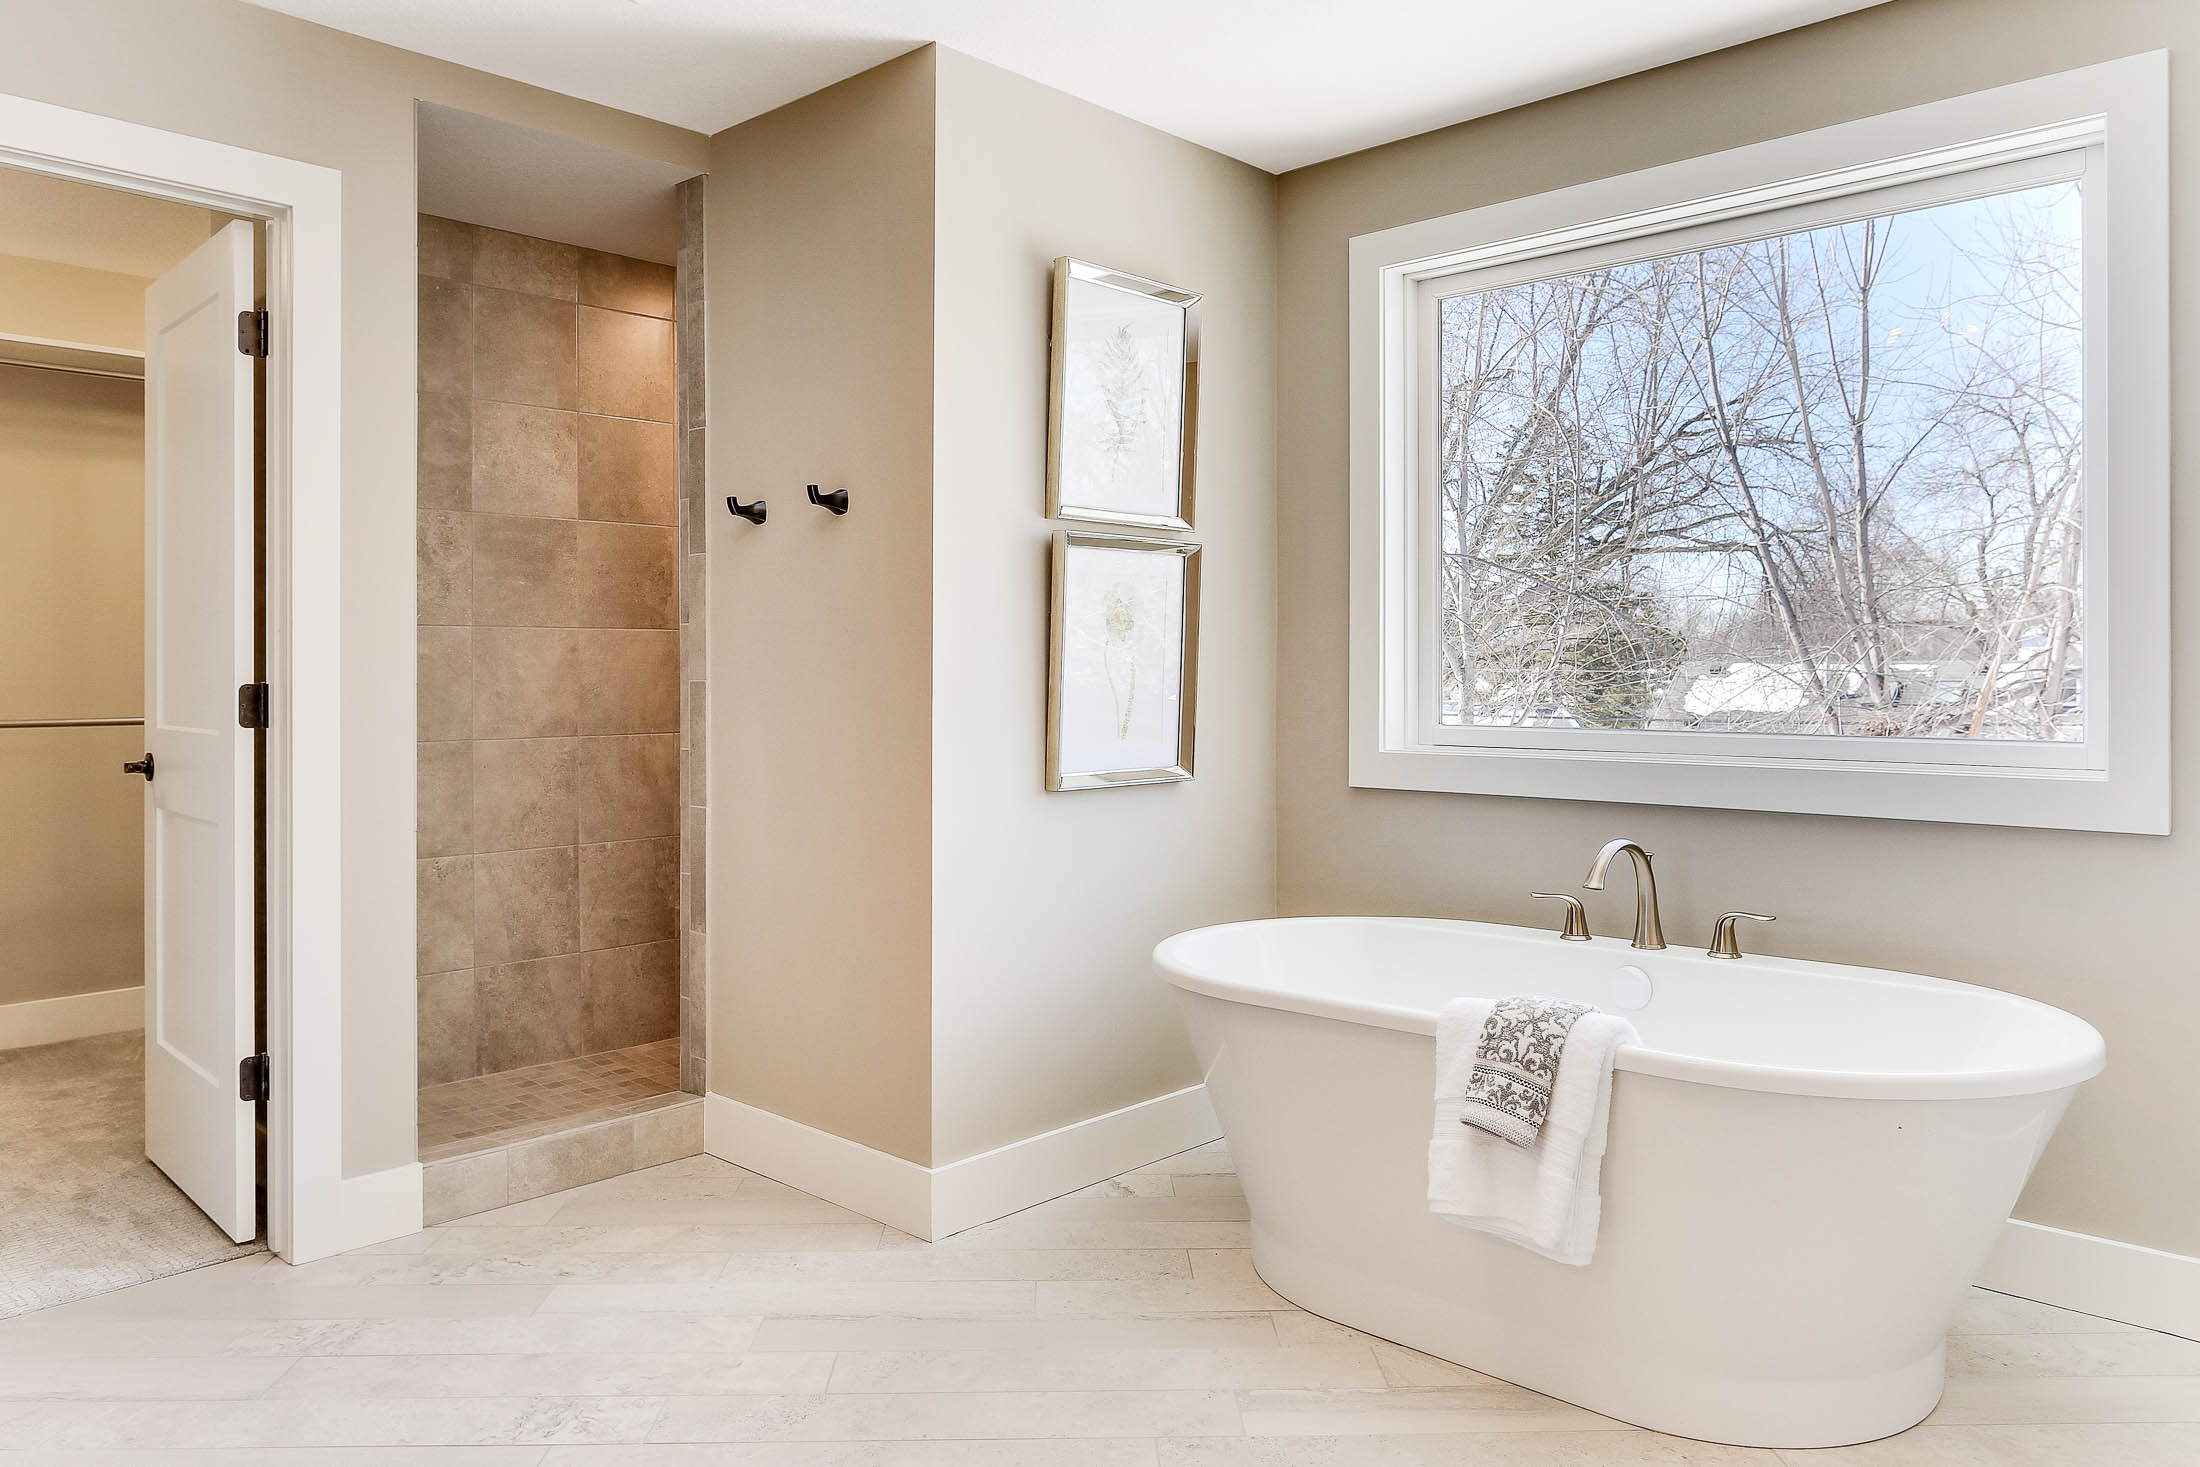 Spacious master bath with free standing tub